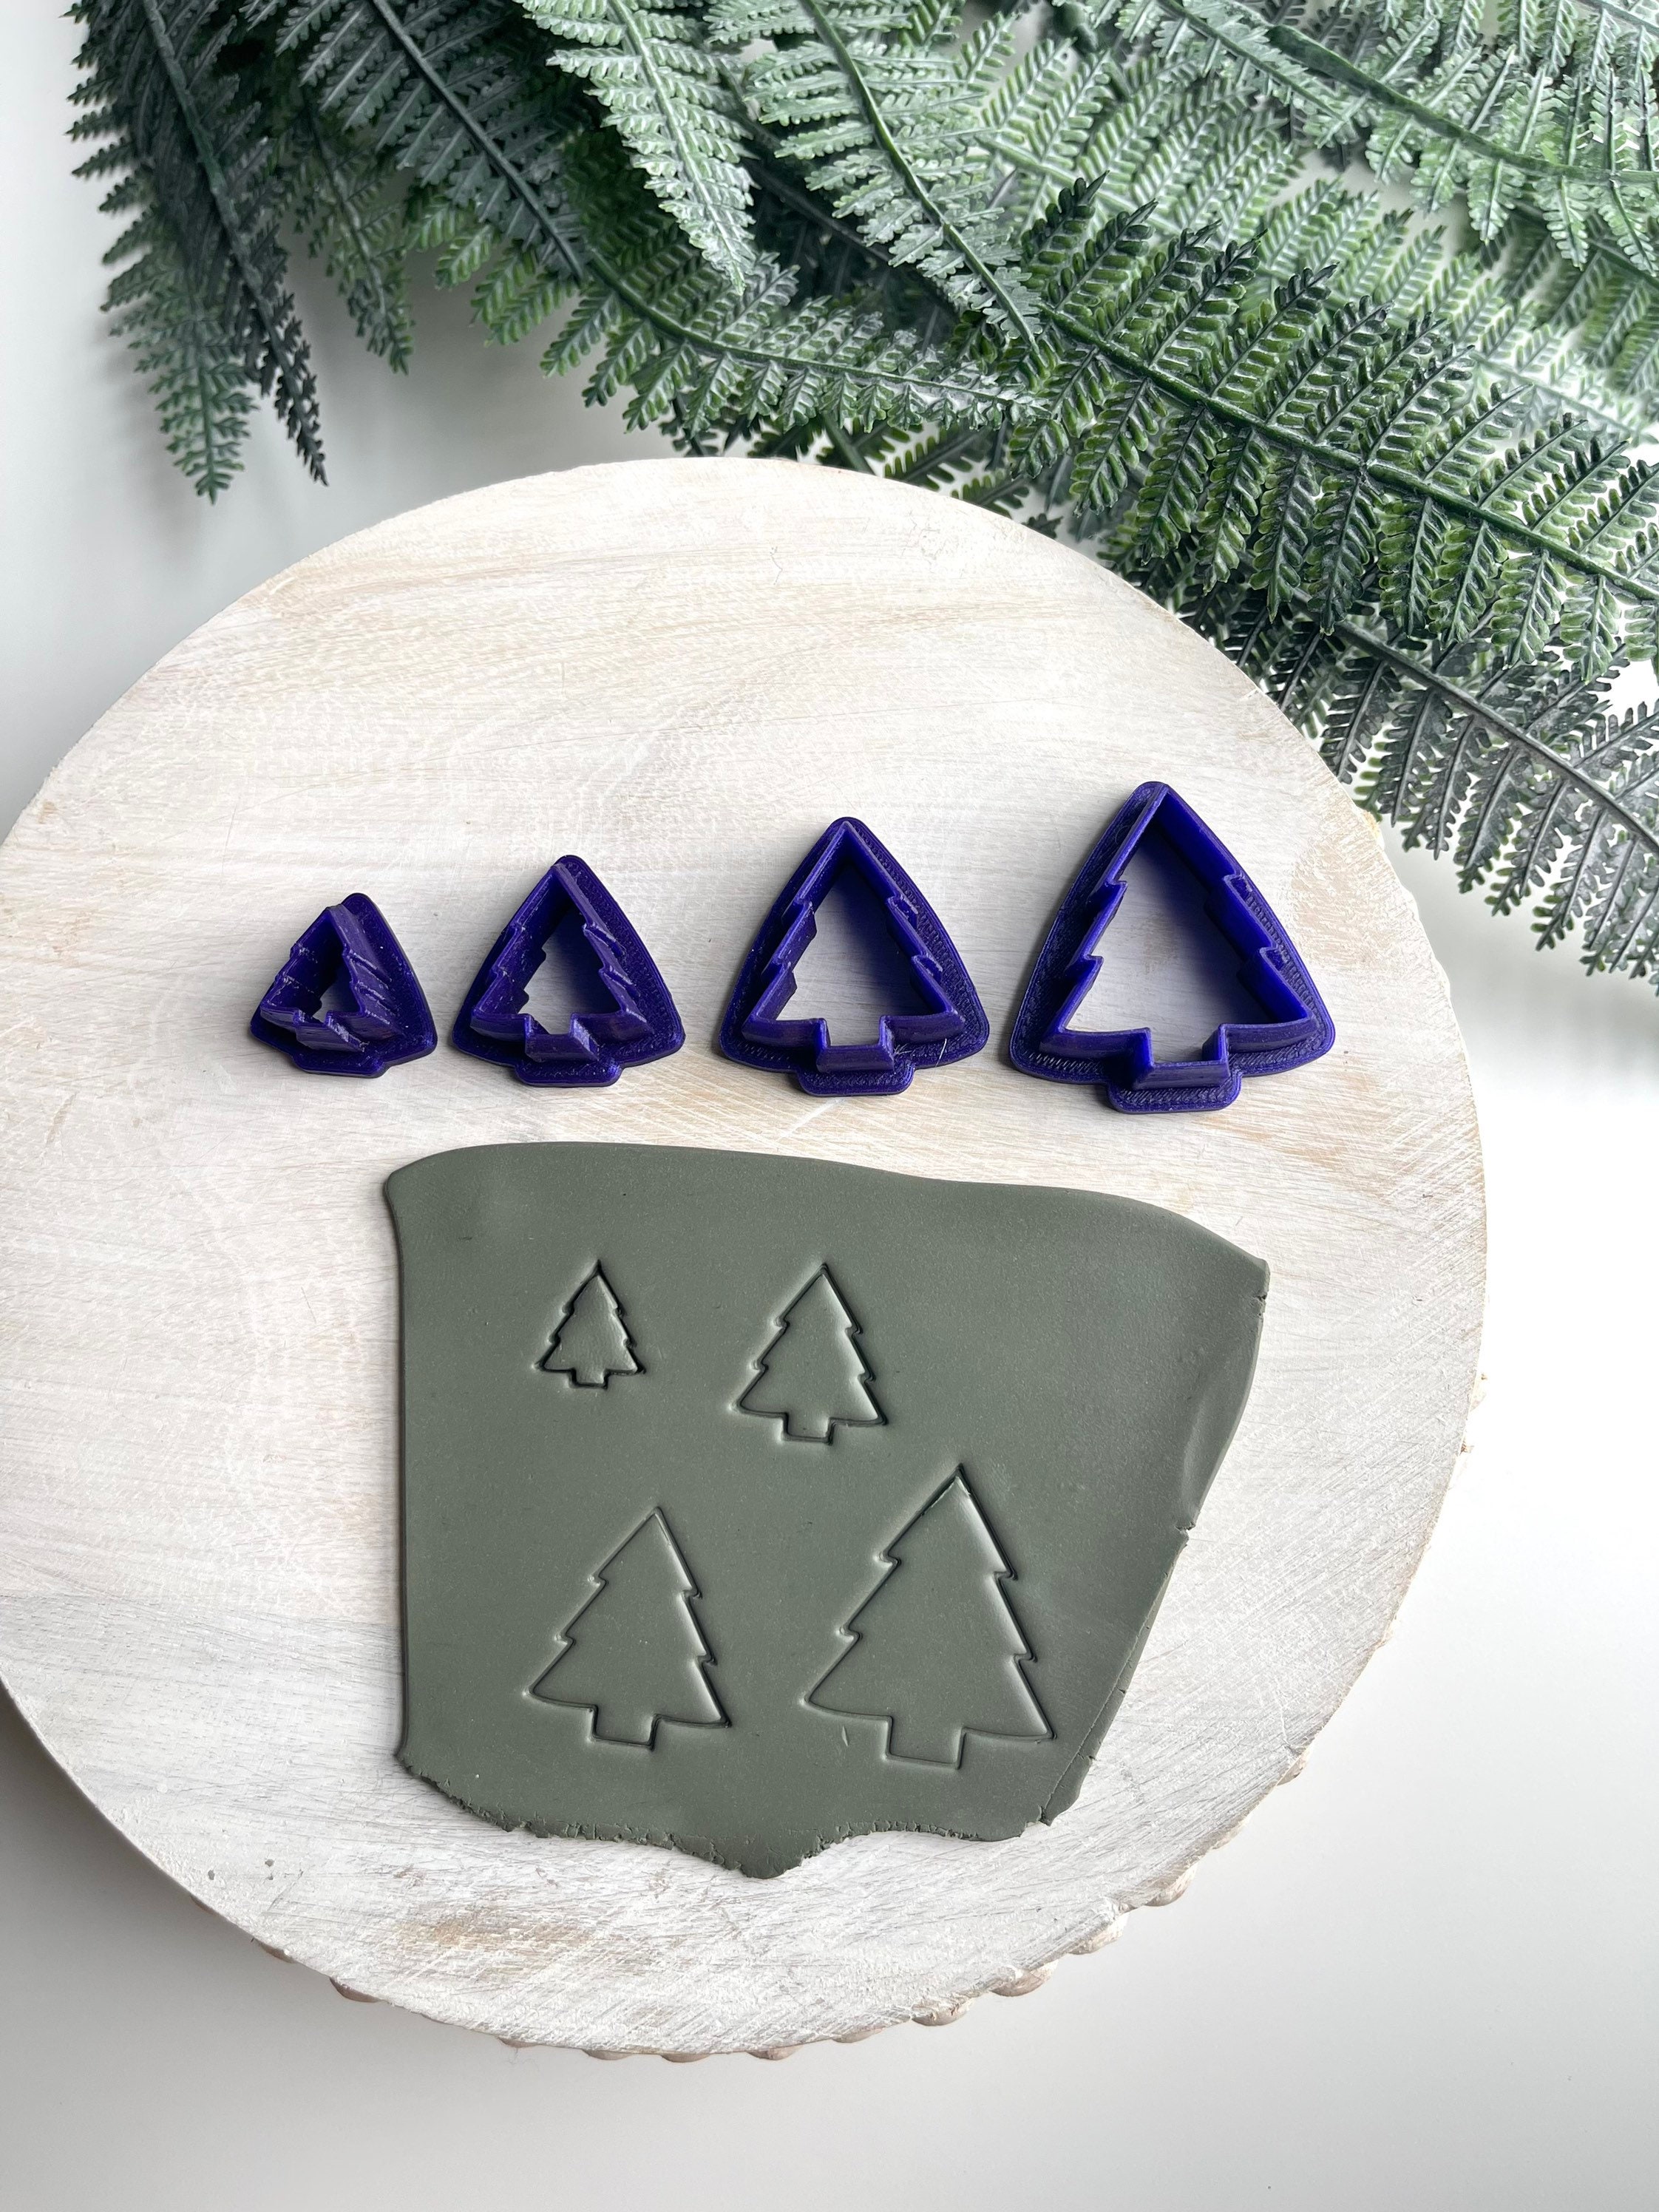 Yinkuu Christmas Clay Cutters, Christmas Polymer Clay Cutters for Earrings Making, 12 Shapes Mini Christmas Clay Earrings Cutters, Small Christmas Tree Clay